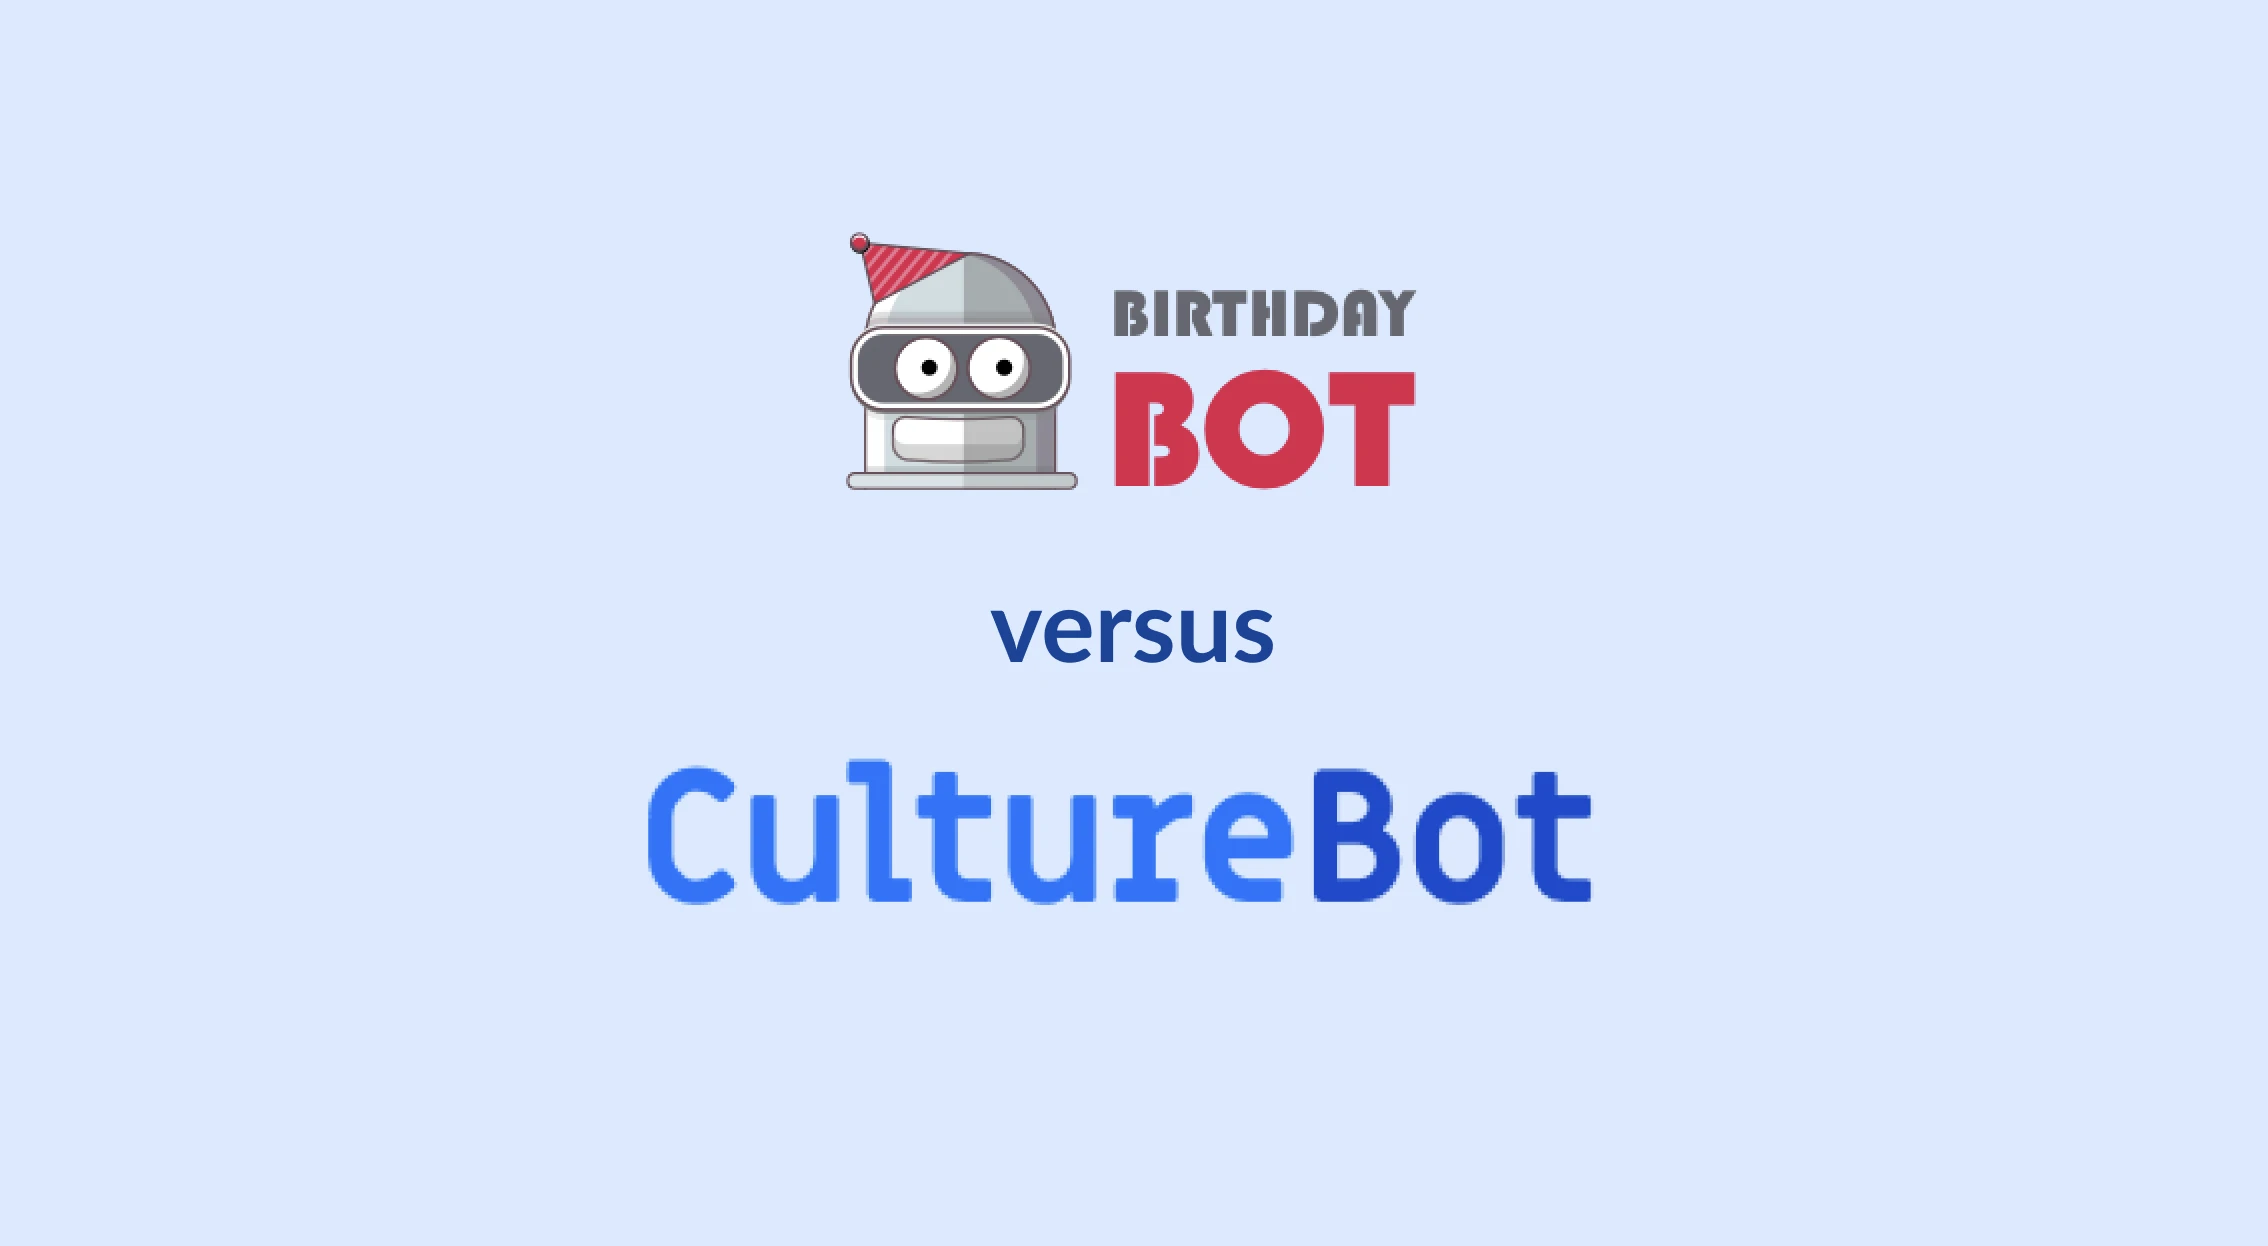 differences between birthday bot and culture bot